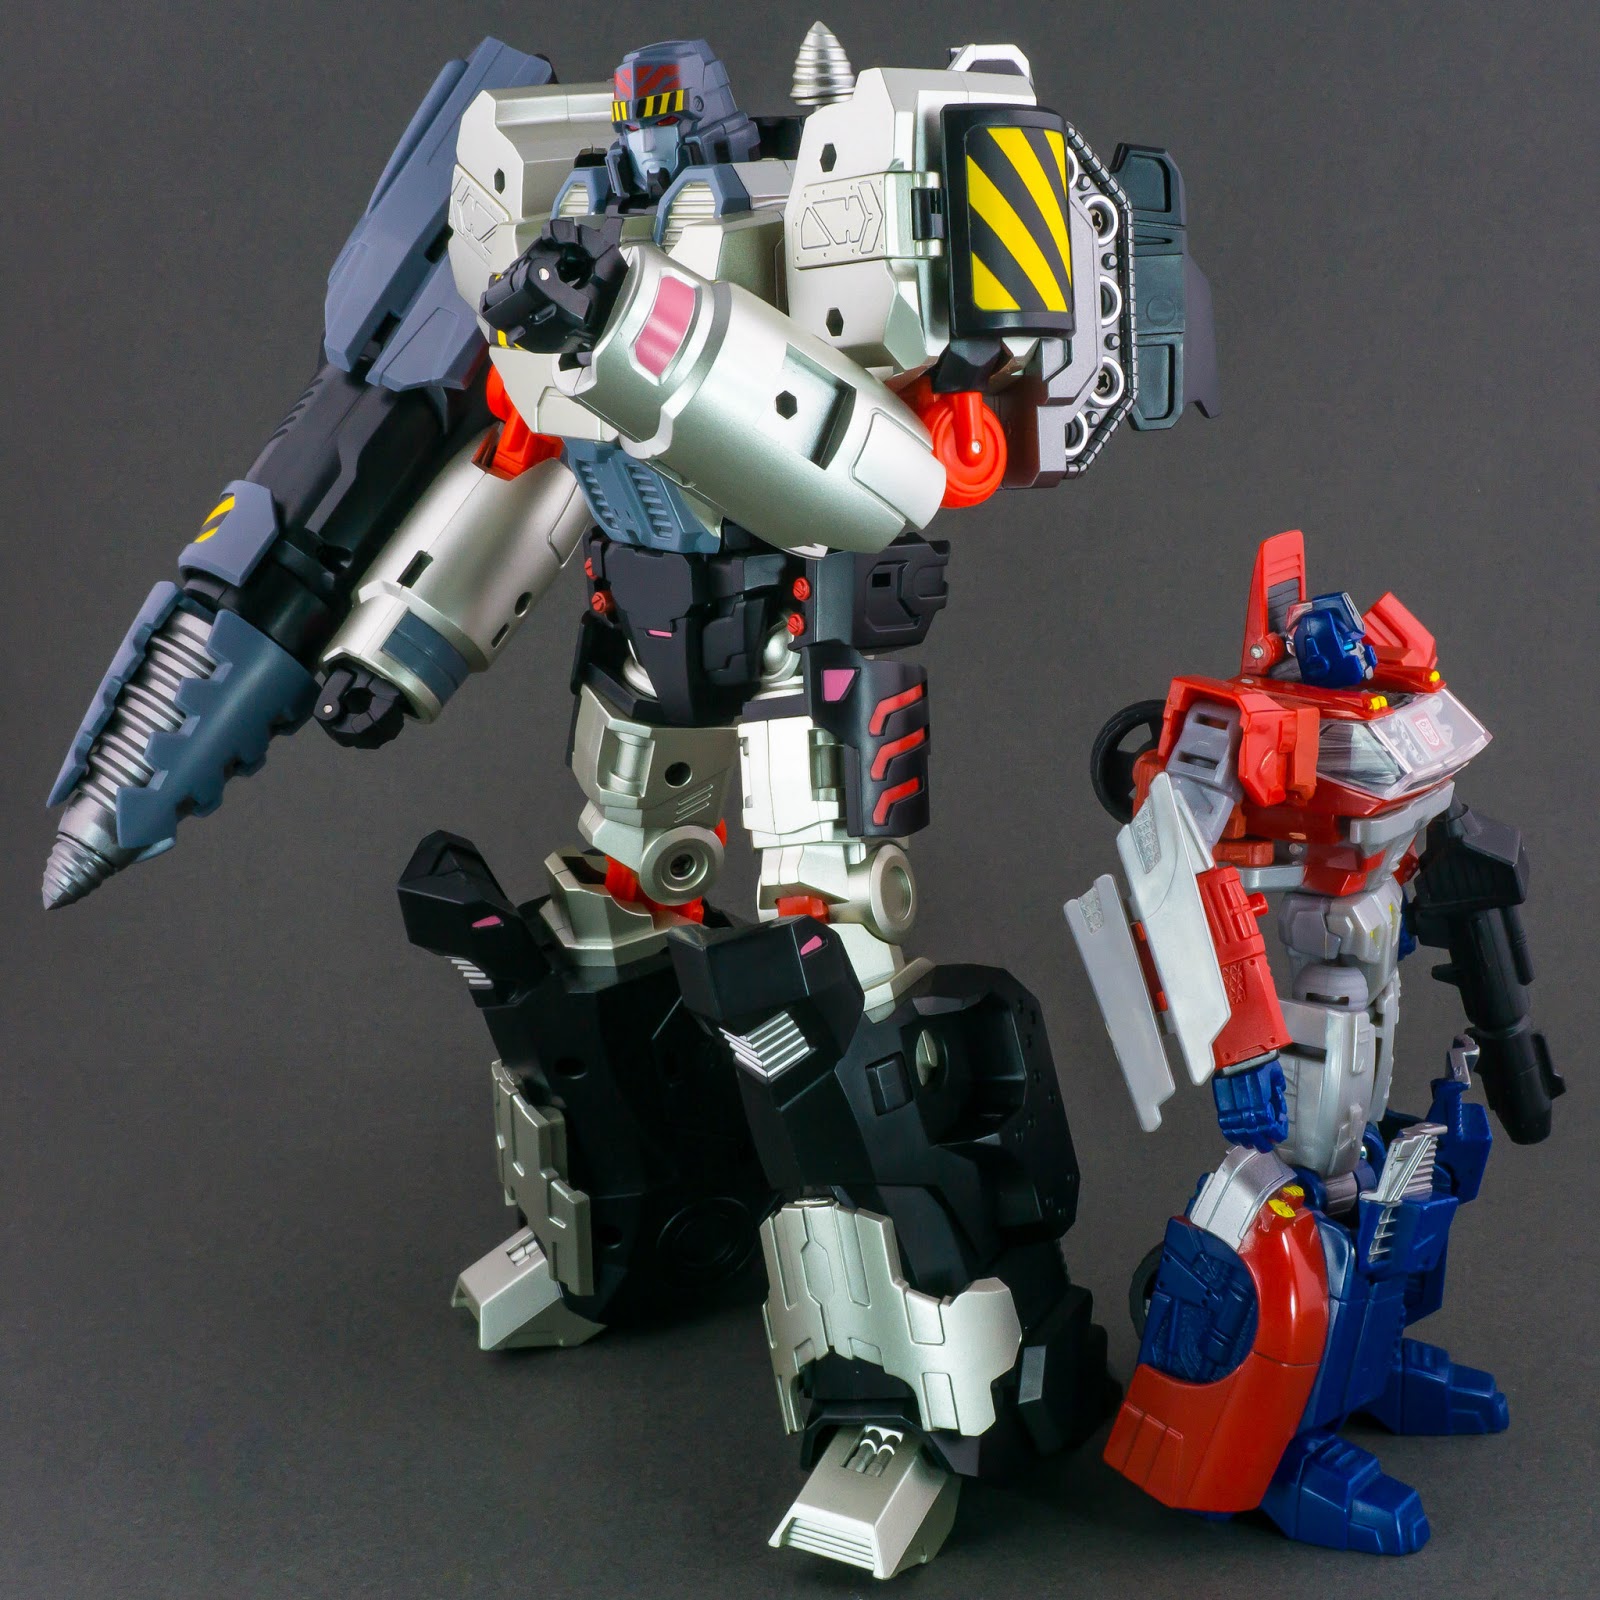 Megatronus and Orion Pax standing back to back